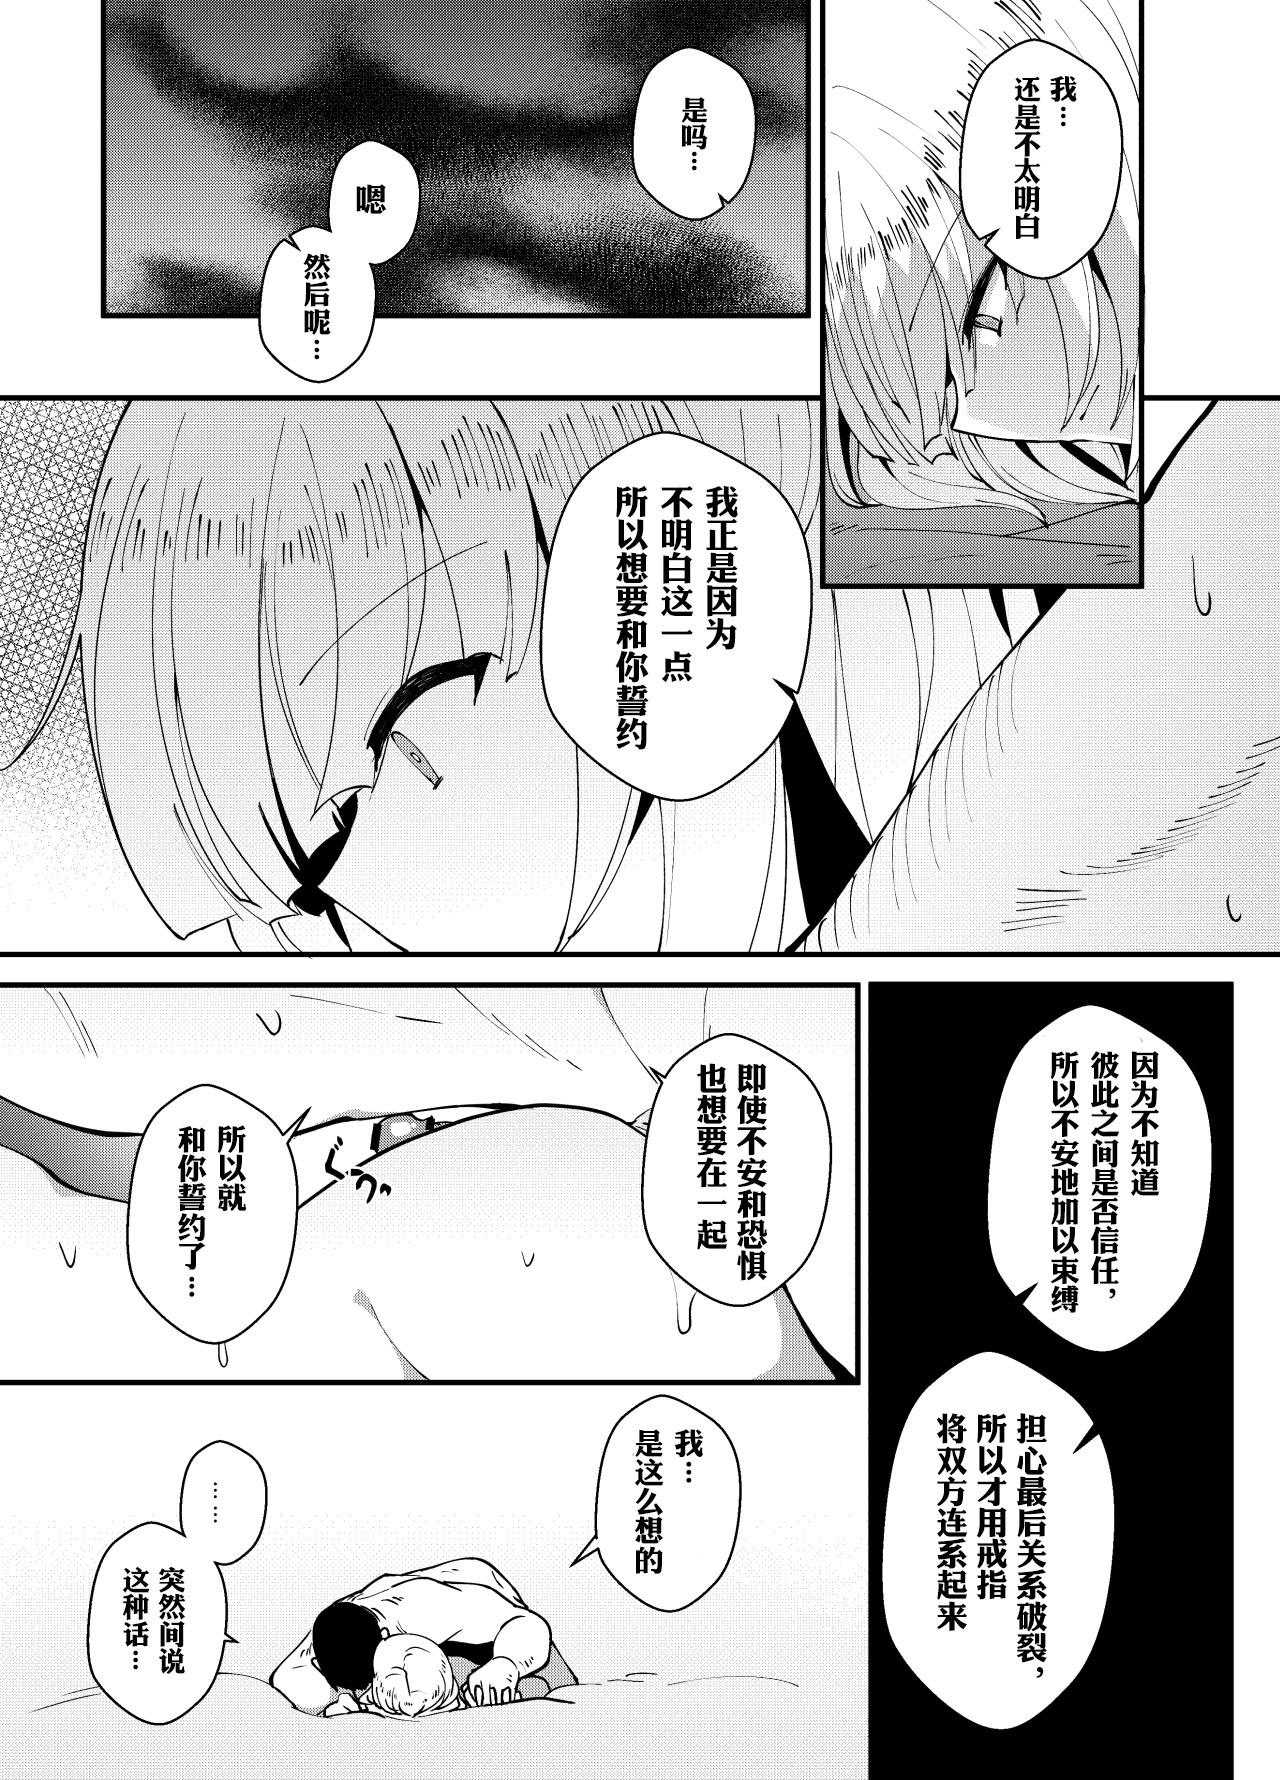 Gapes Gaping Asshole RPK-16 - Girls frontline Insane Porn - Page 4